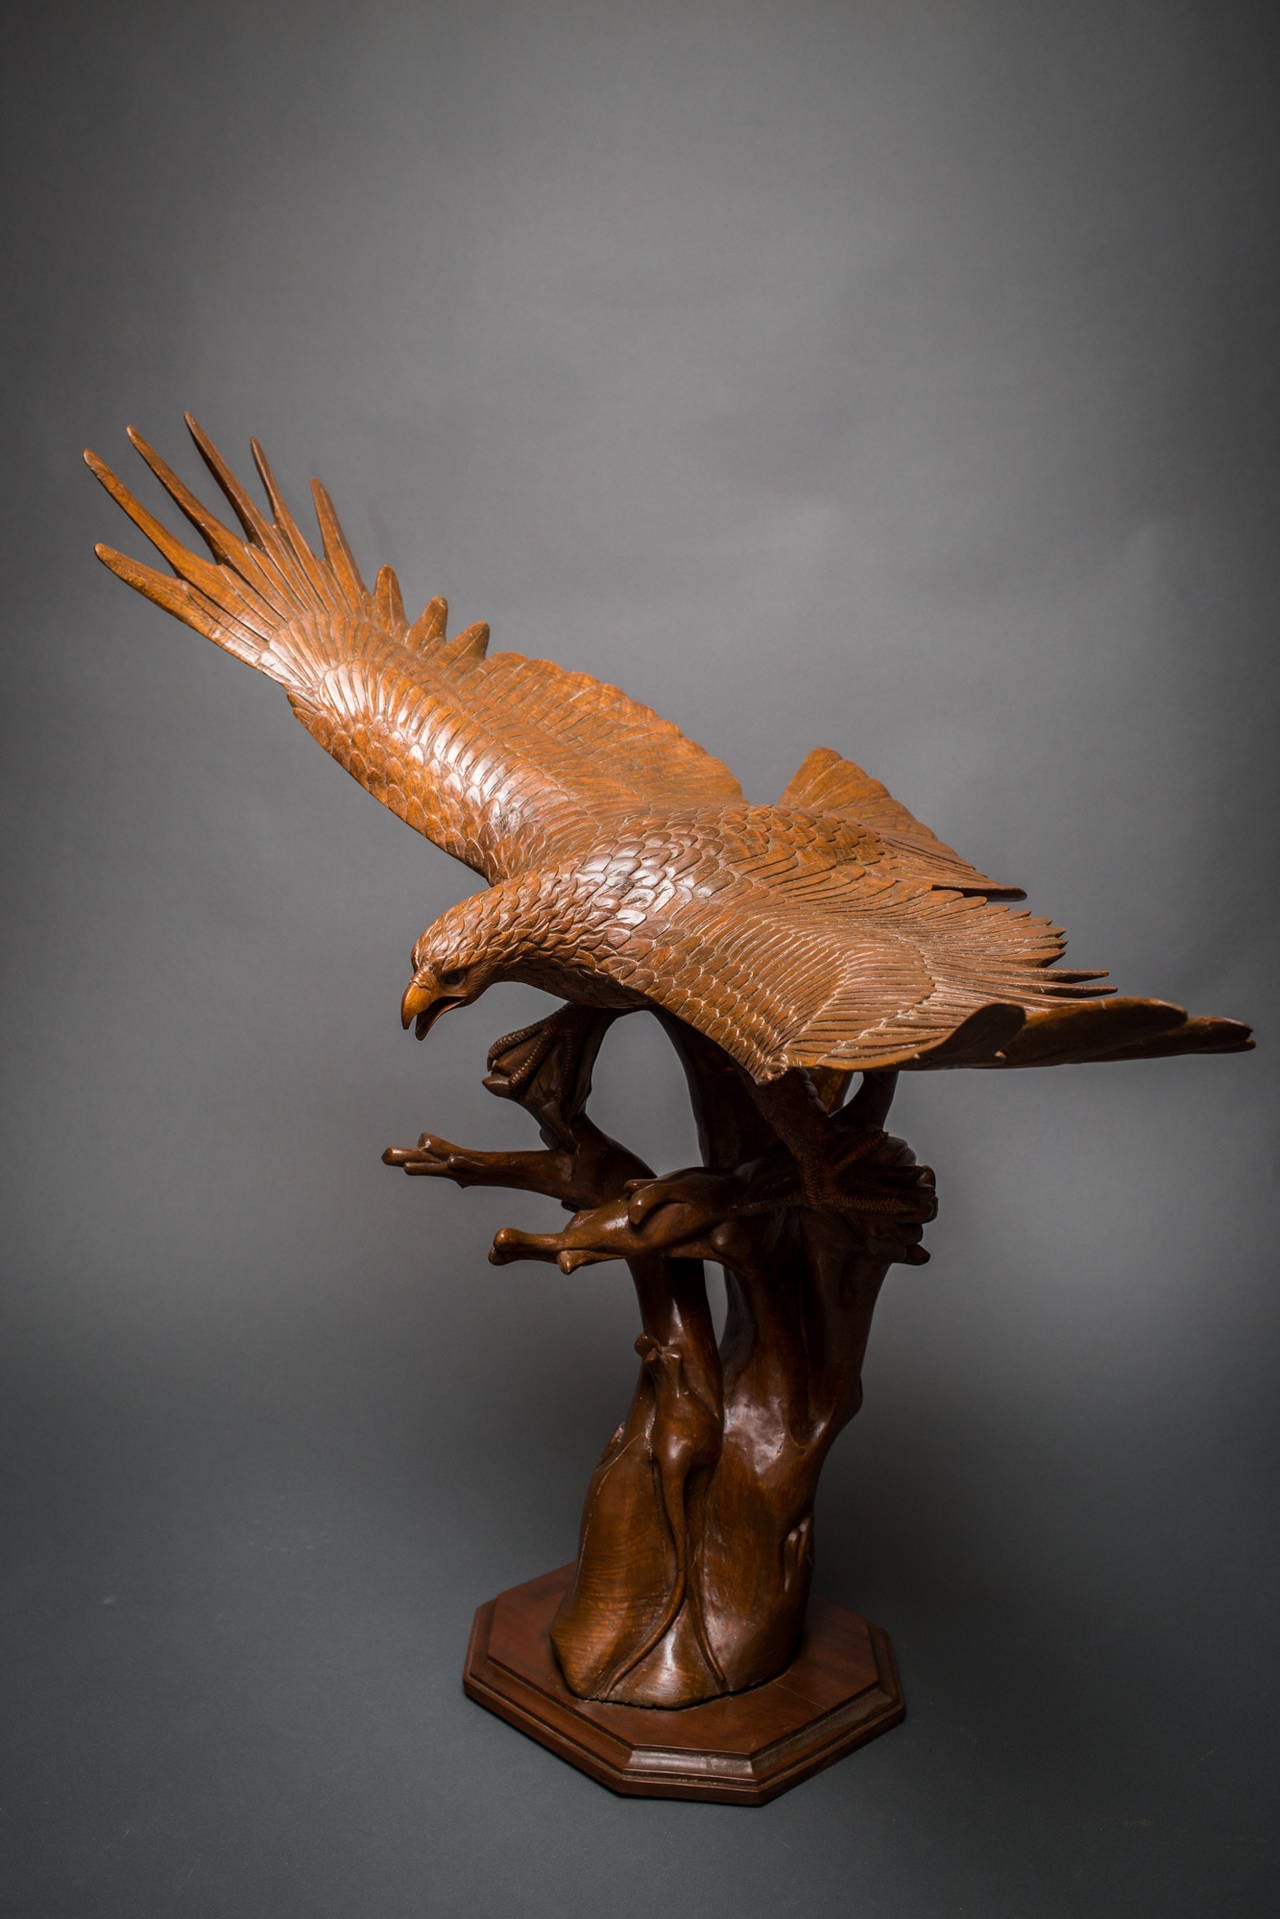 Large Antique Japanese Carving of an Eagle.  Meiji period (1868 - 1912) carving of an eagle about to take flight.  The sculpture is expertly carved from a single piece of hard wood (an ancient technique called ichiboku zukuri).